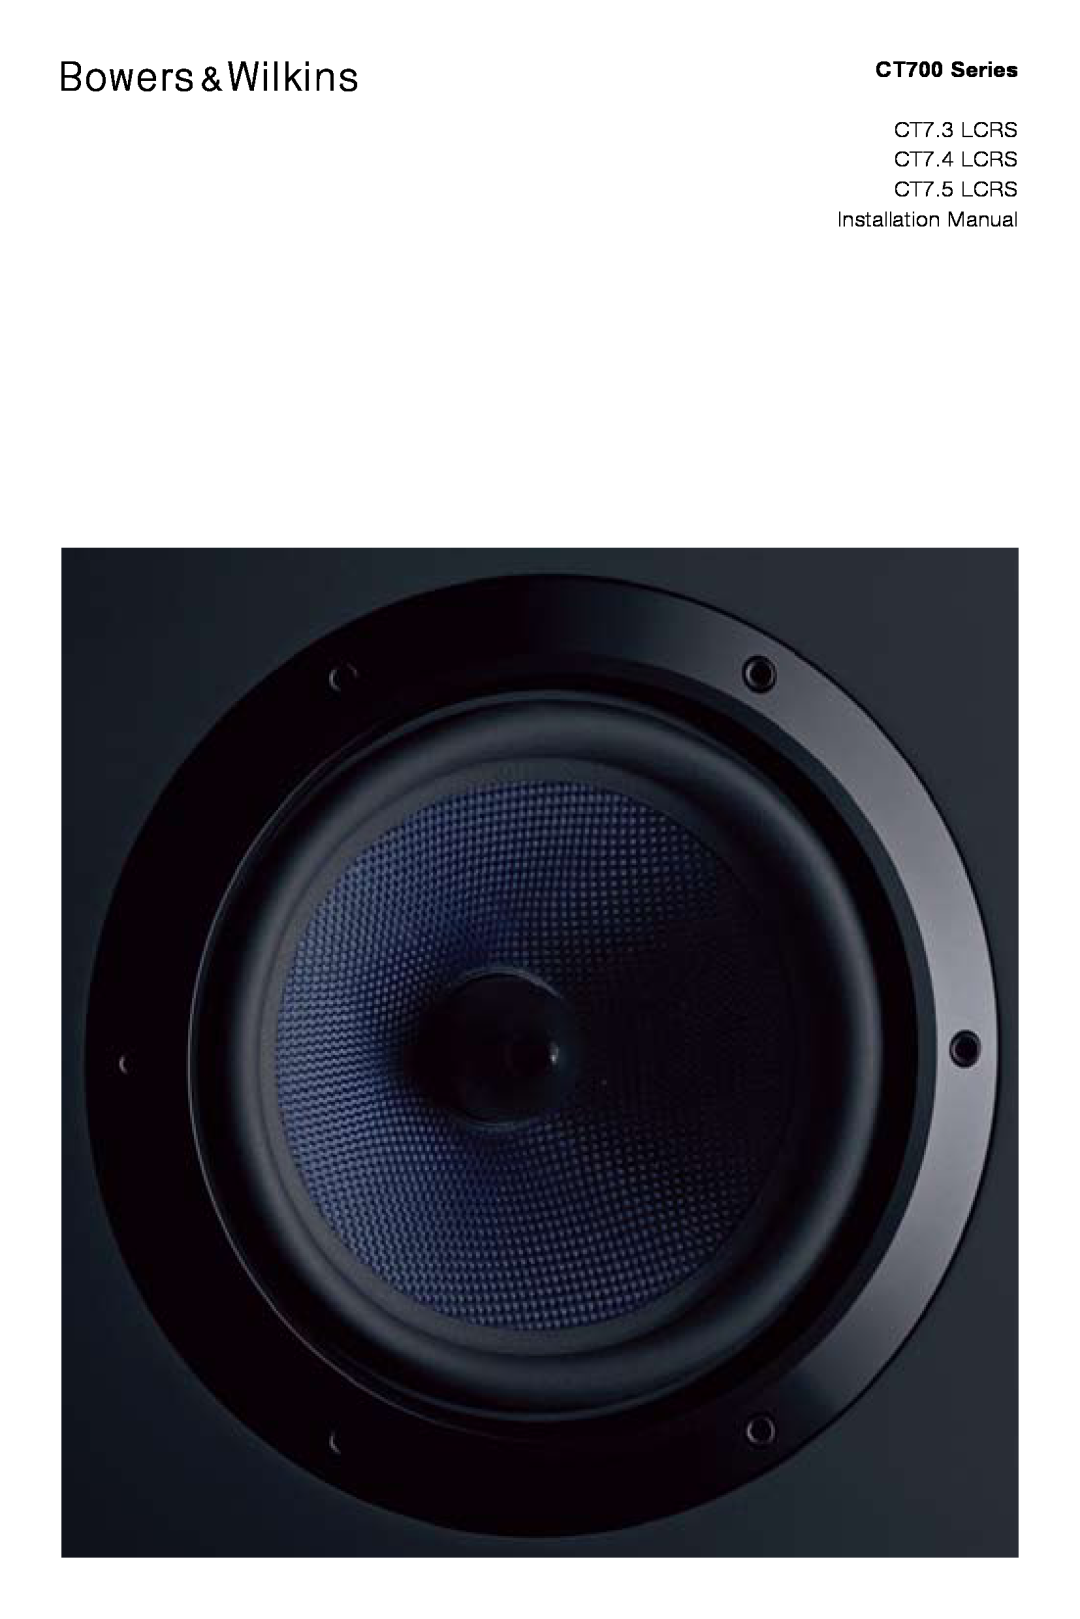 Bowers & Wilkins installation manual CT700 Series, CT7.3 LCRS CT7.4 LCRS, CT7.5 LCRS Installation Manual 